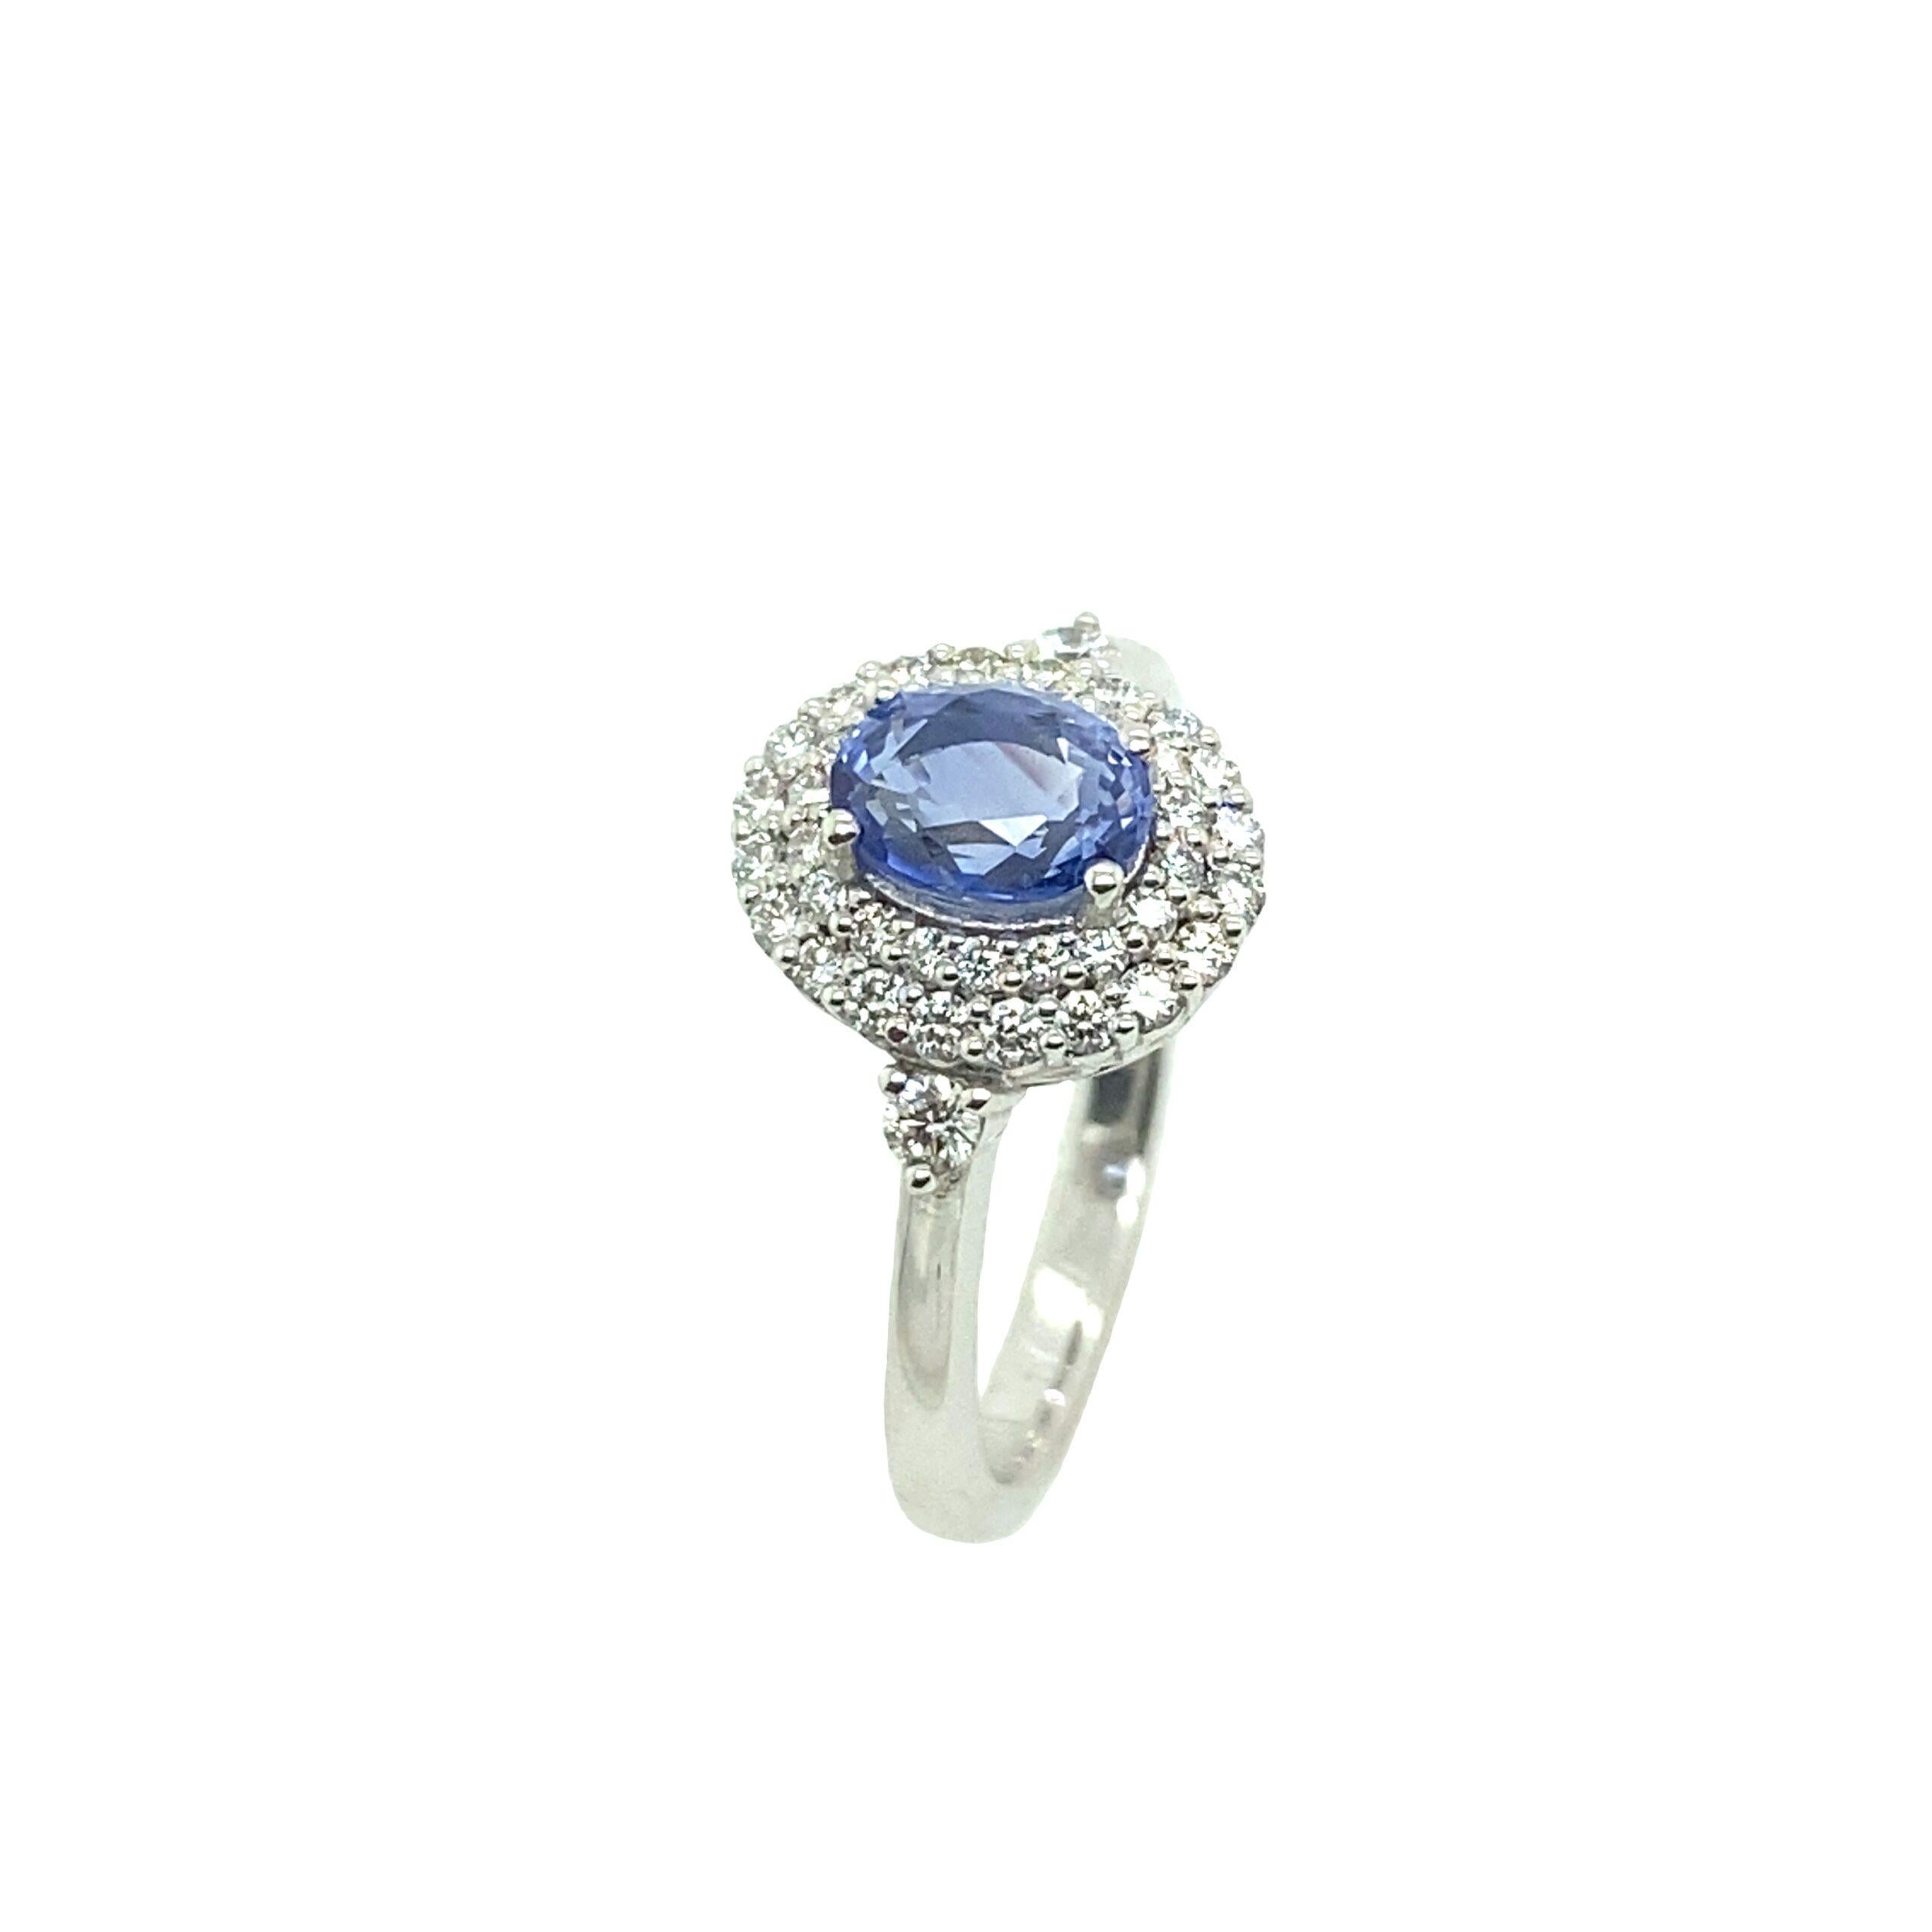 New 1.03ct Certified Natural Ceylon Sapphire Ring, Surrounded by 0.31ct Diamonds

Additional Information:
Set in 18ct White Gold
Total Diamond Weight: 0.31ct
Diamond Colour: F
Diamond Clarity: VS
Total Weight: 4.9g
Ring Size: M1/2
Width Of Head: